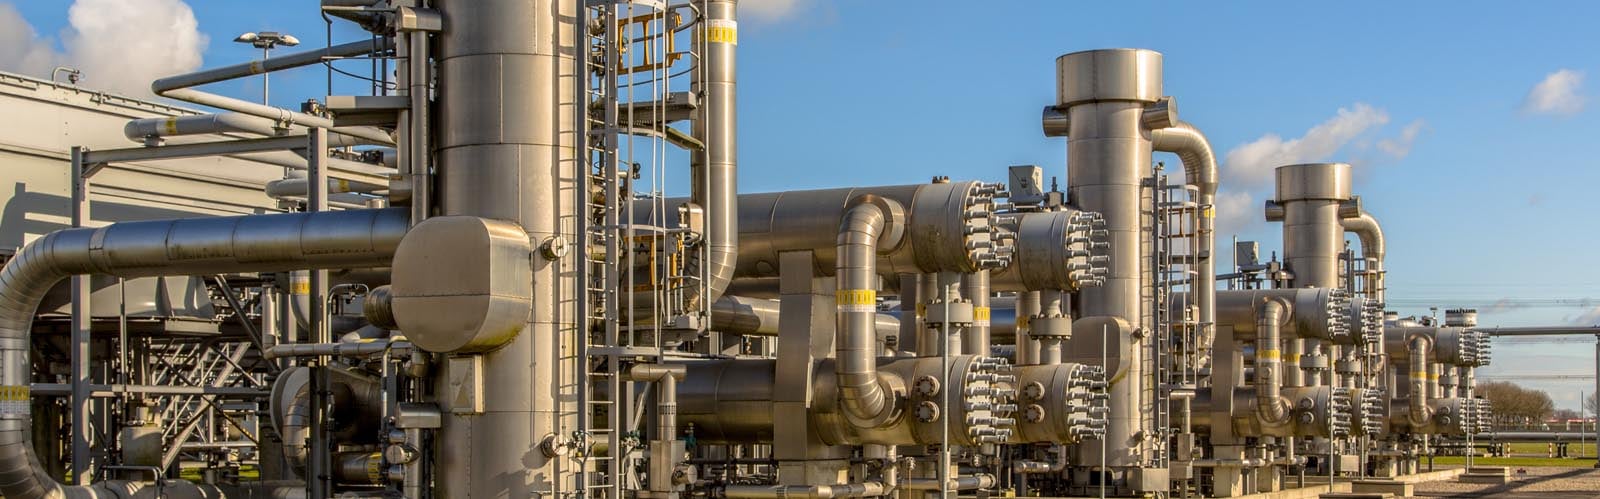 Effectively automate your LNG process